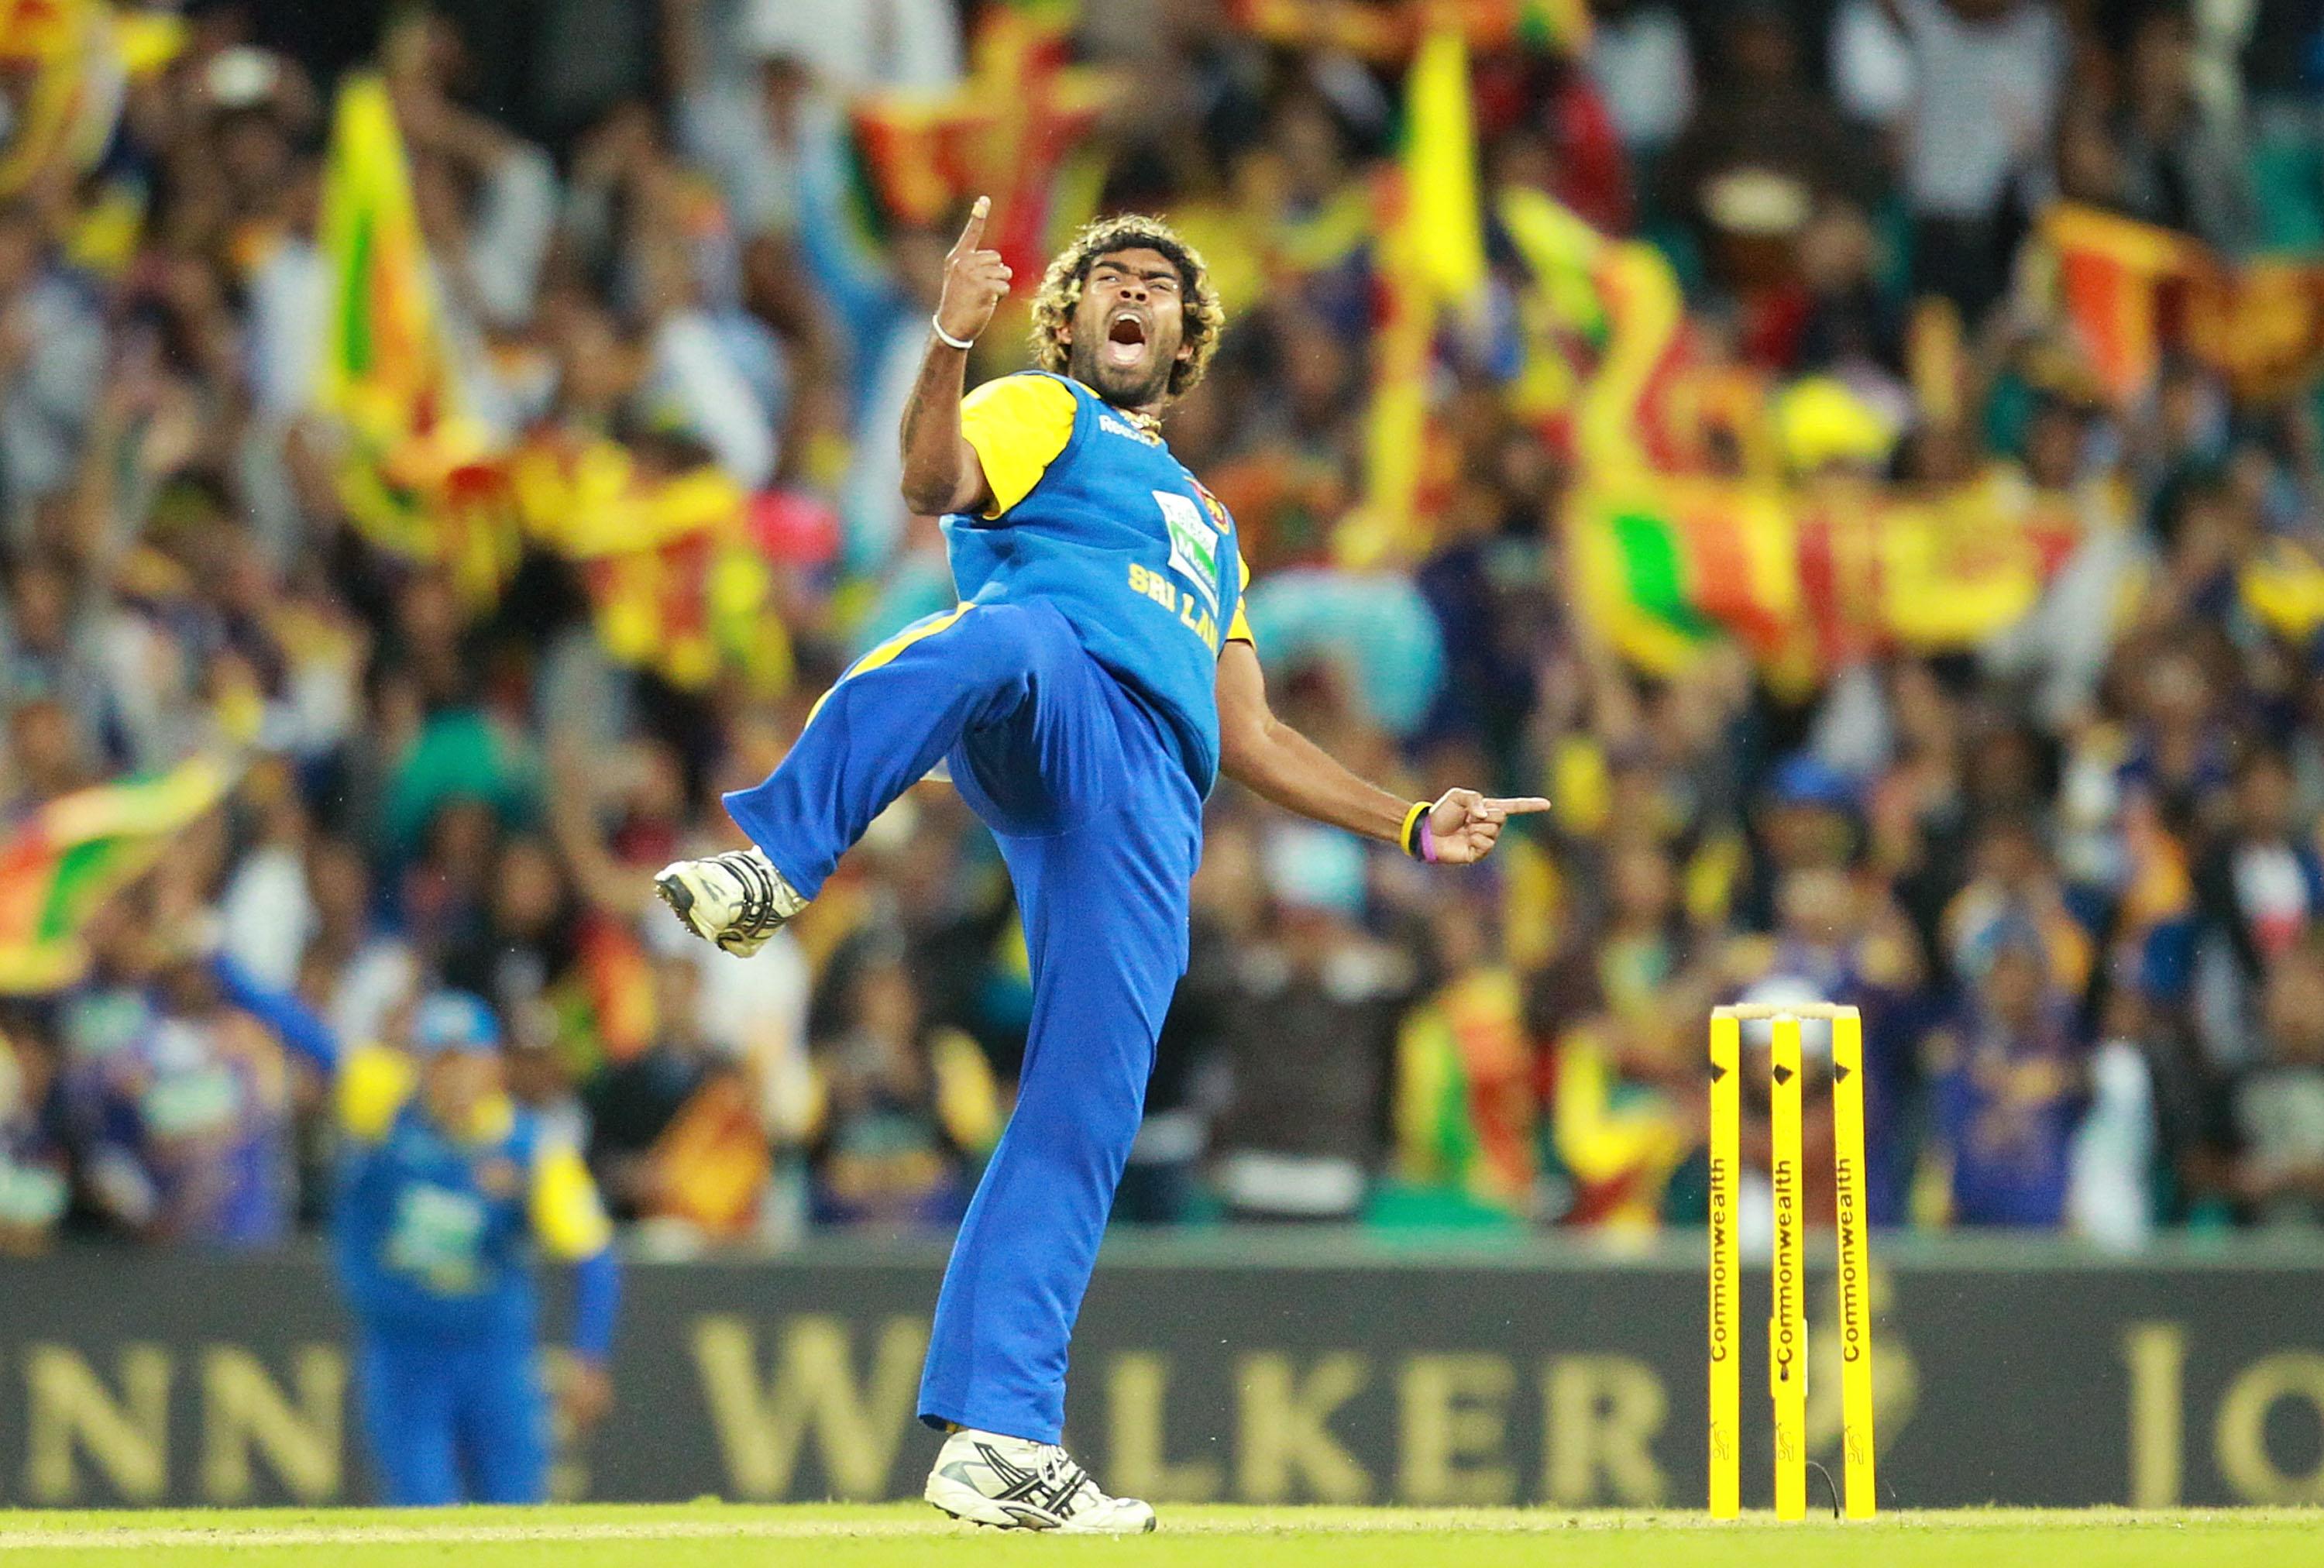 'Time to rebuild is over' – Malinga gears up for World Cup year